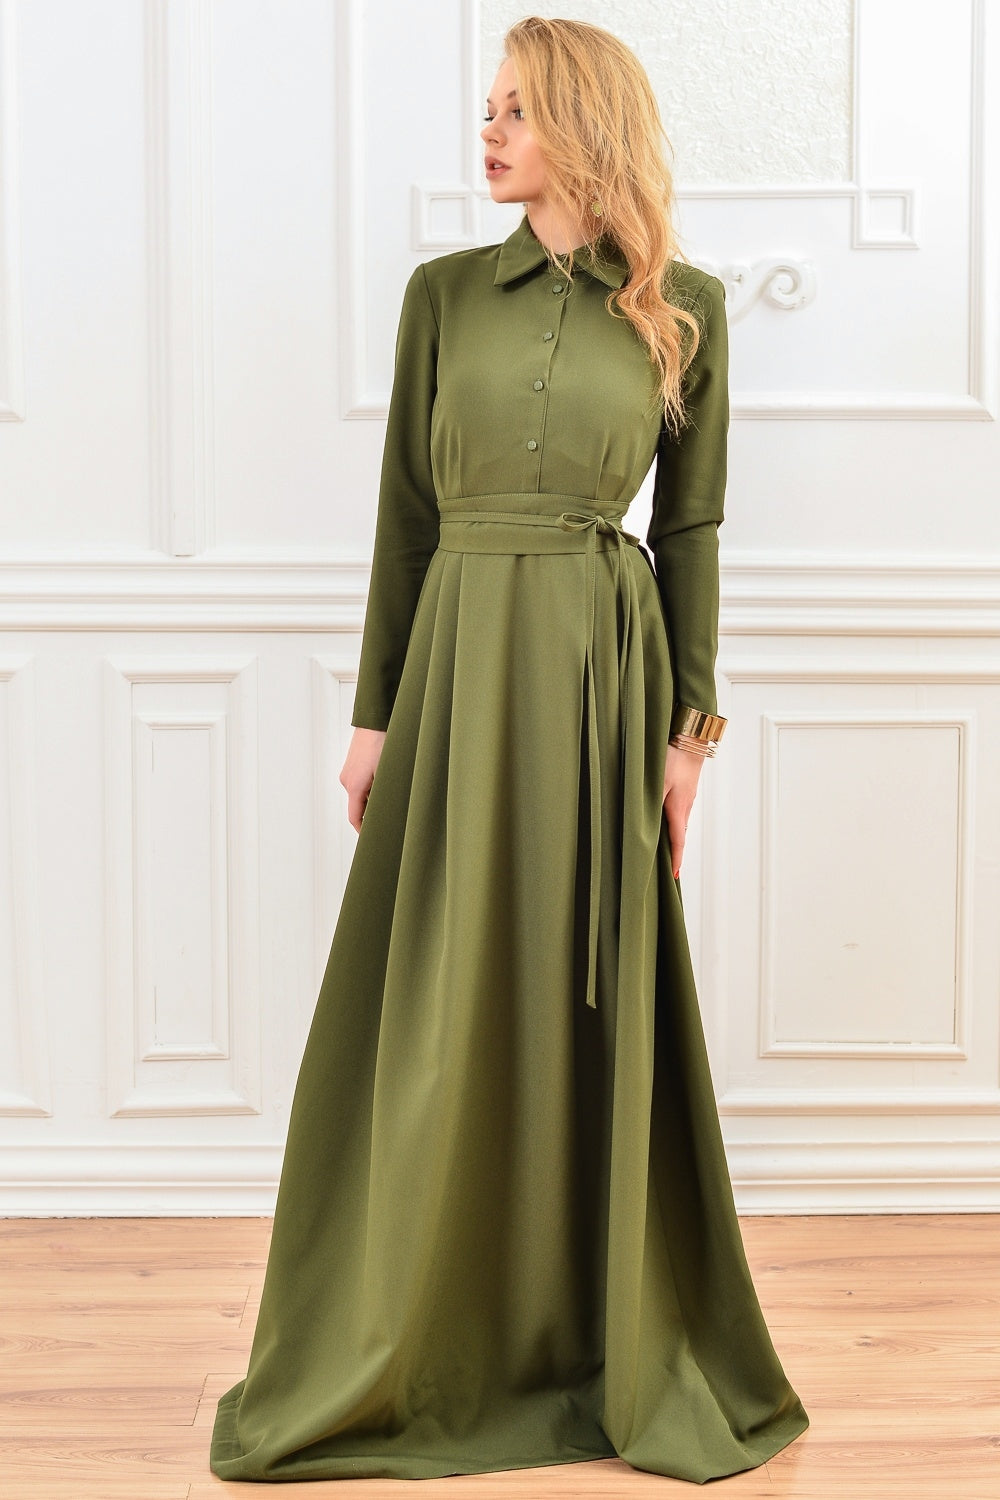 Khaki green maxi dress with front buttons